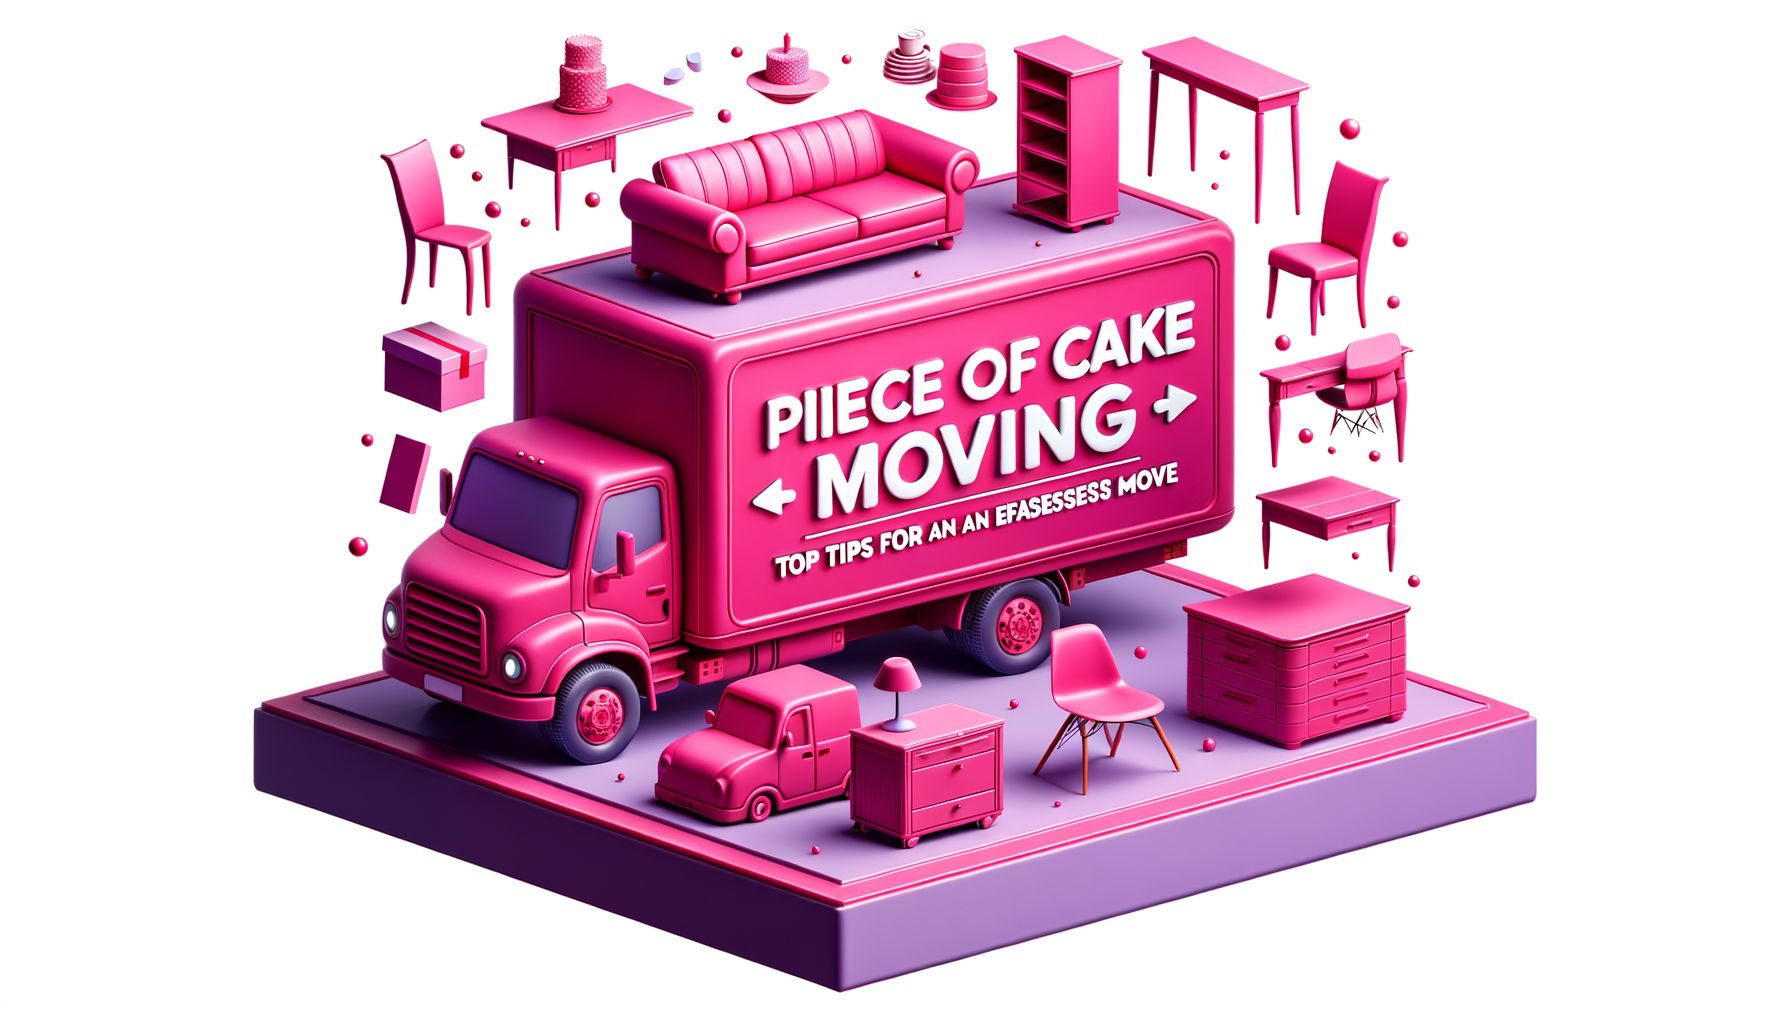 Cartoon illustration of a fuchsia-colored moving truck with furniture pieces floating effortlessly around it, symbolizing top tips for an easy move.